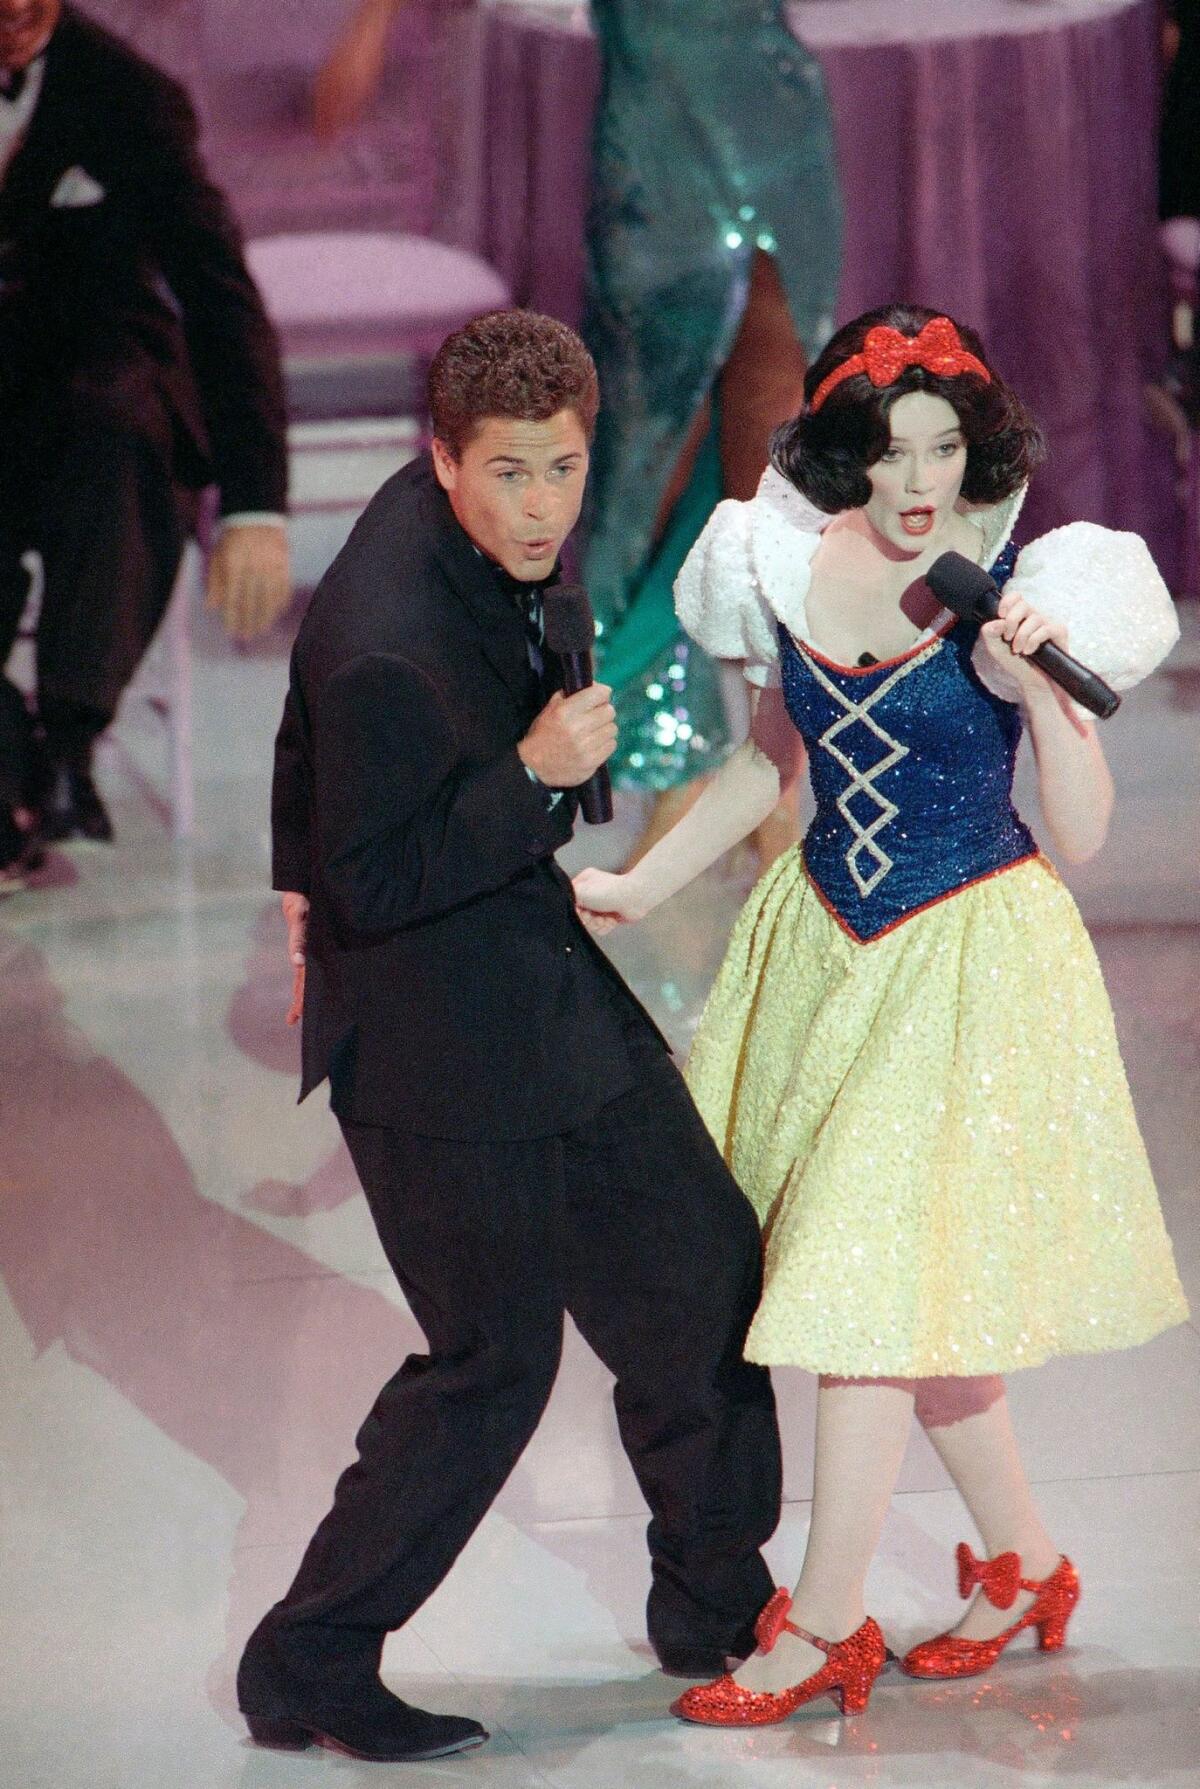 Rob Lowe croons a tune to Snow White during the opening number for the 61st Academy Awards.